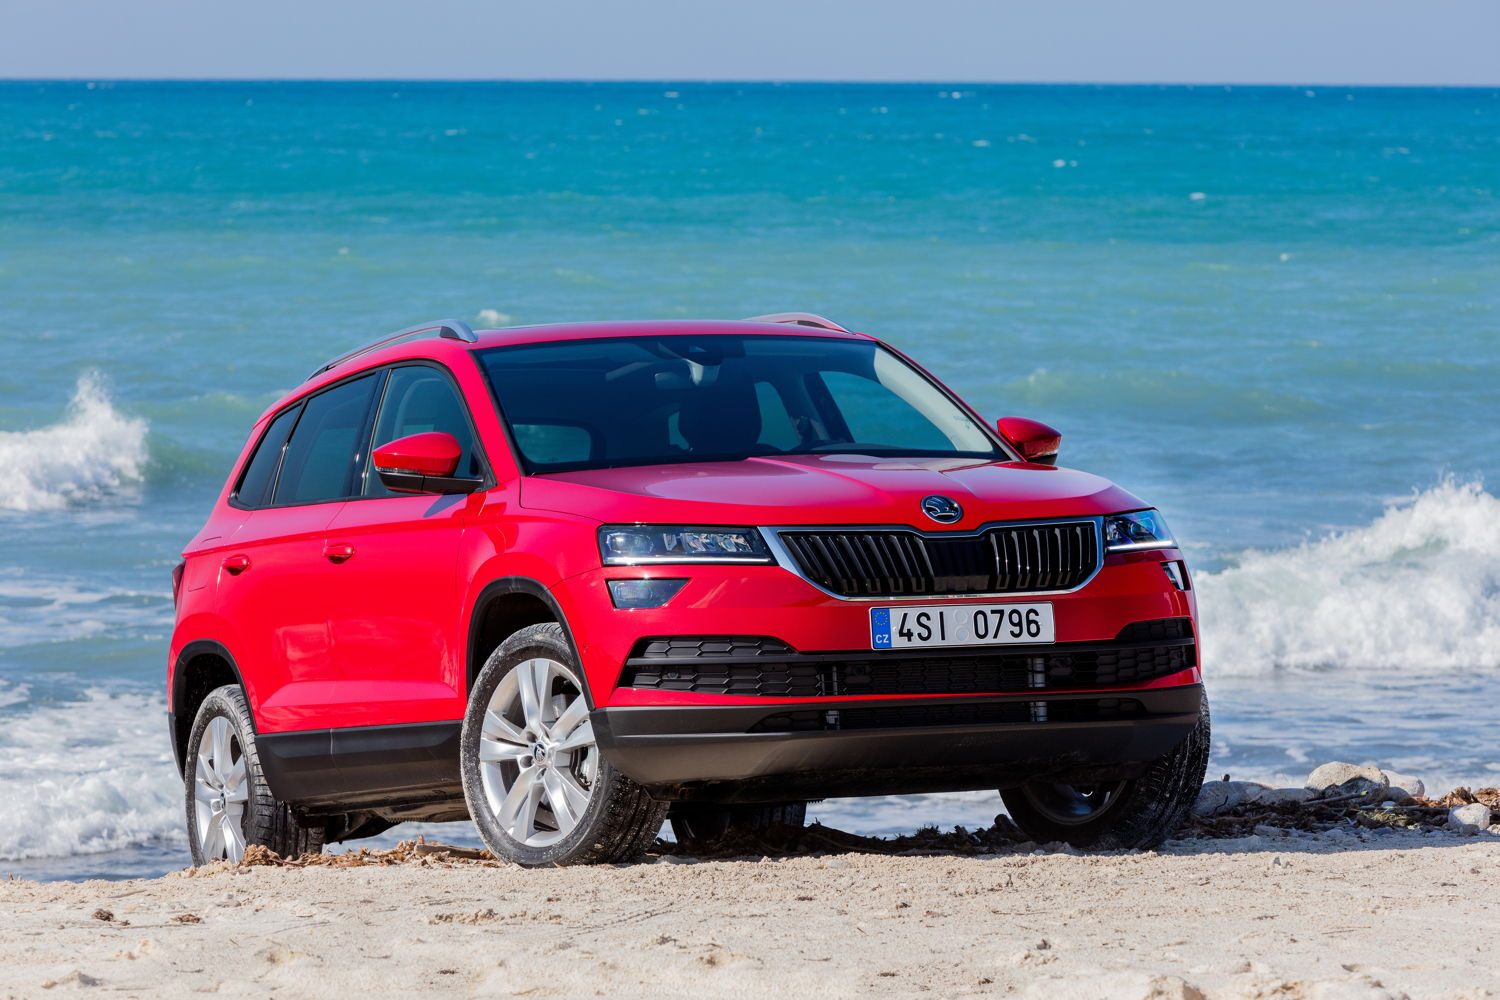 The SUV models KODIAQ and KAROQ are a cornerstone of
the Czech carmaker’s dynamic growth.